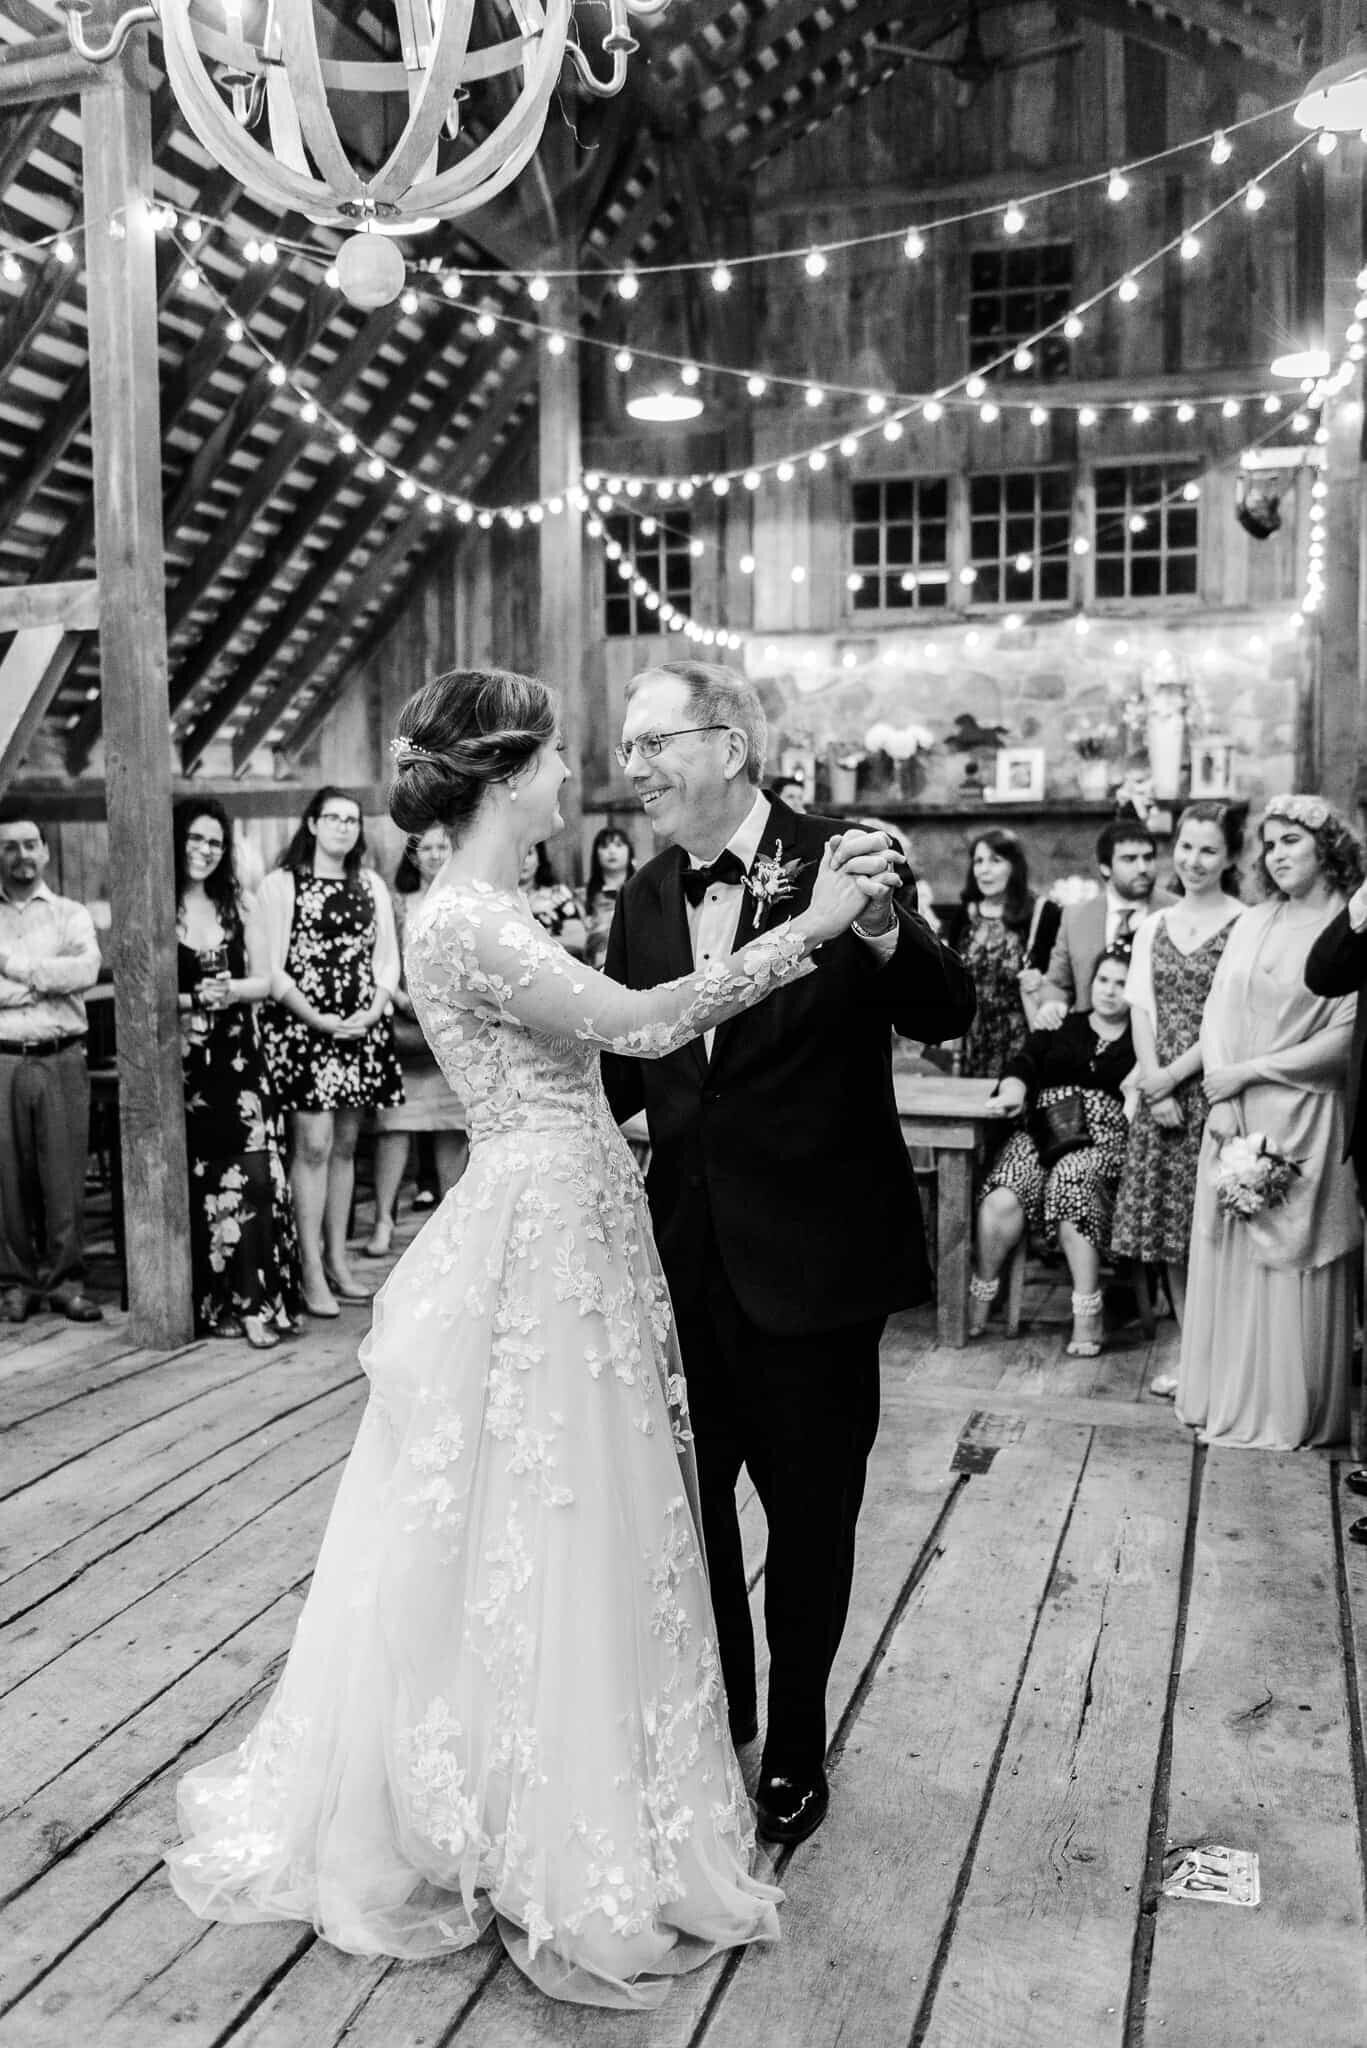 A bride dancing with her father during a wedding at The Barns at Hamilton Station Vineyard in Loudoun County